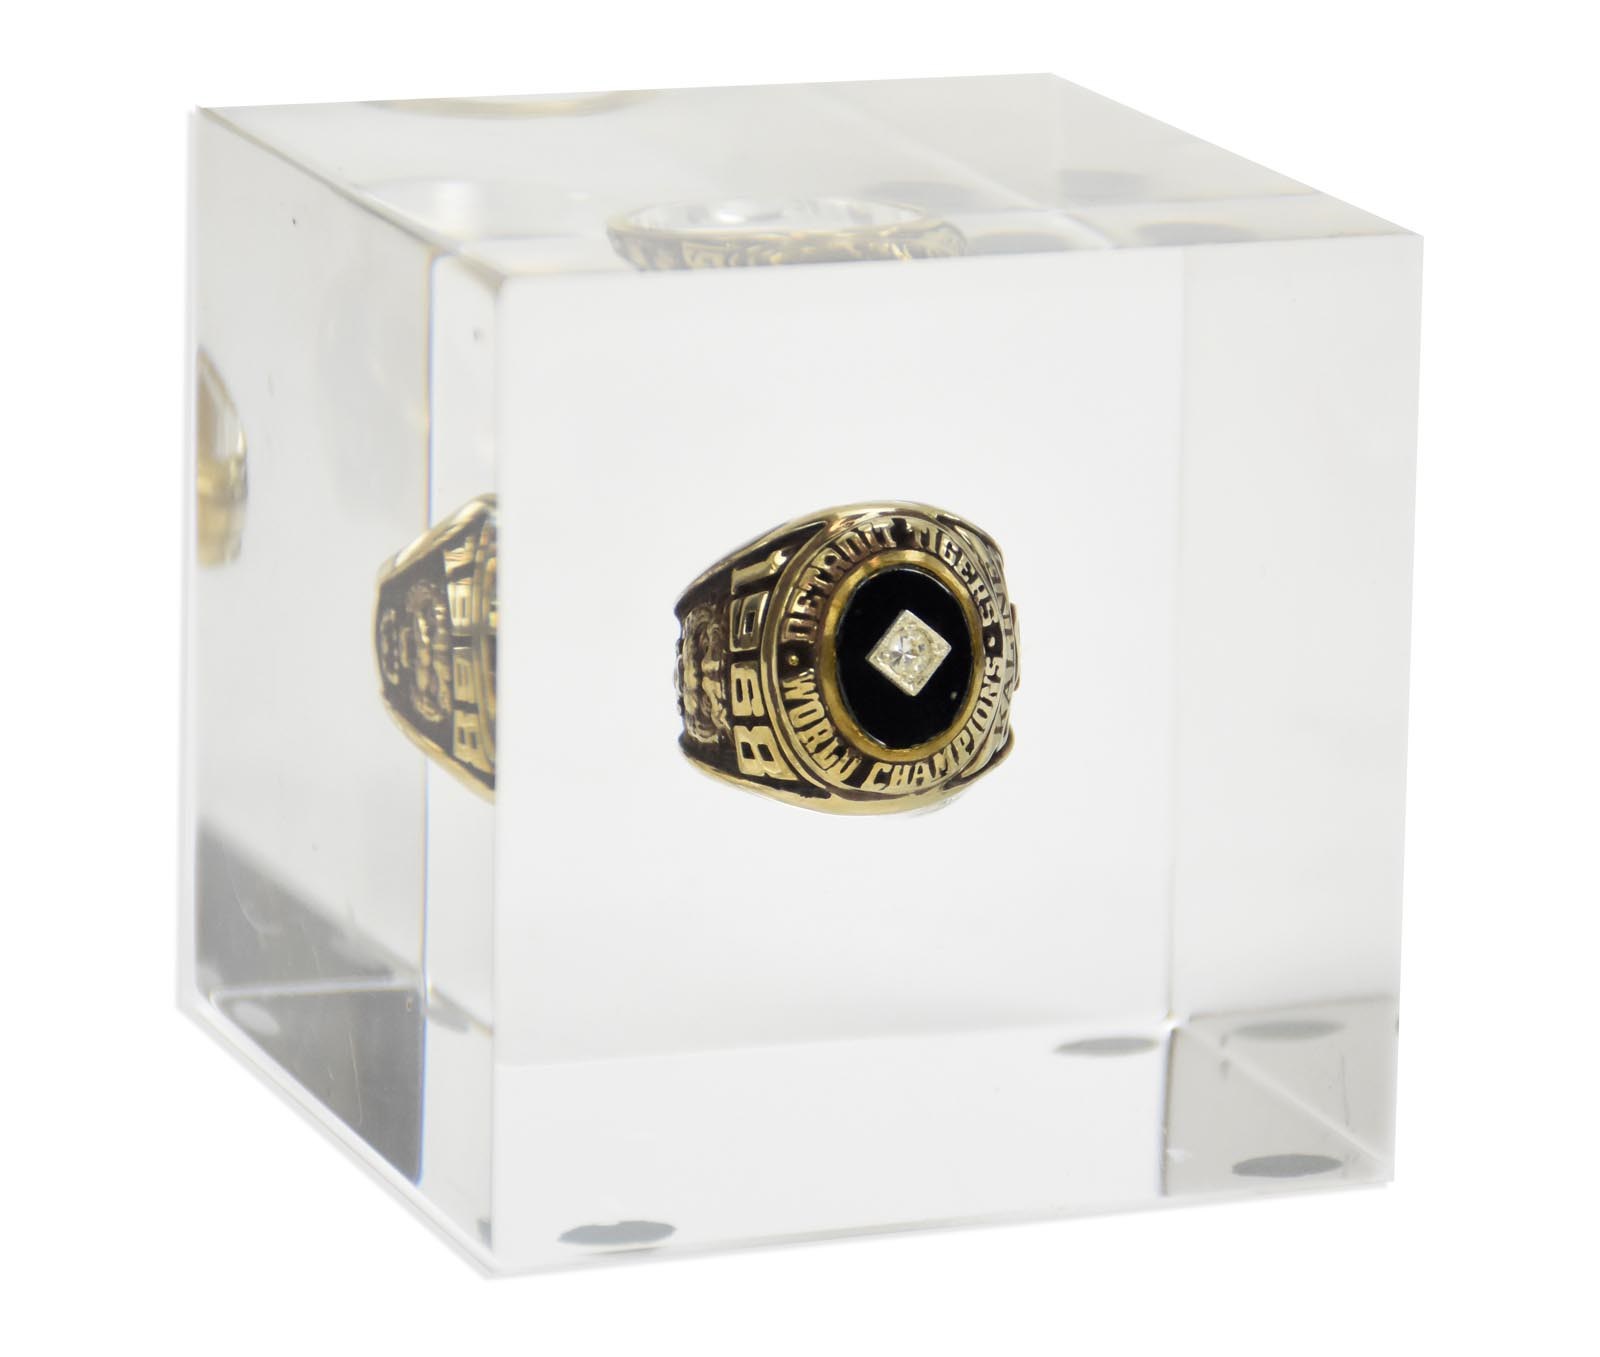 Ty Cobb and Detroit Tigers - 1968 Detroit Tigers World Championship Ring in Lucite